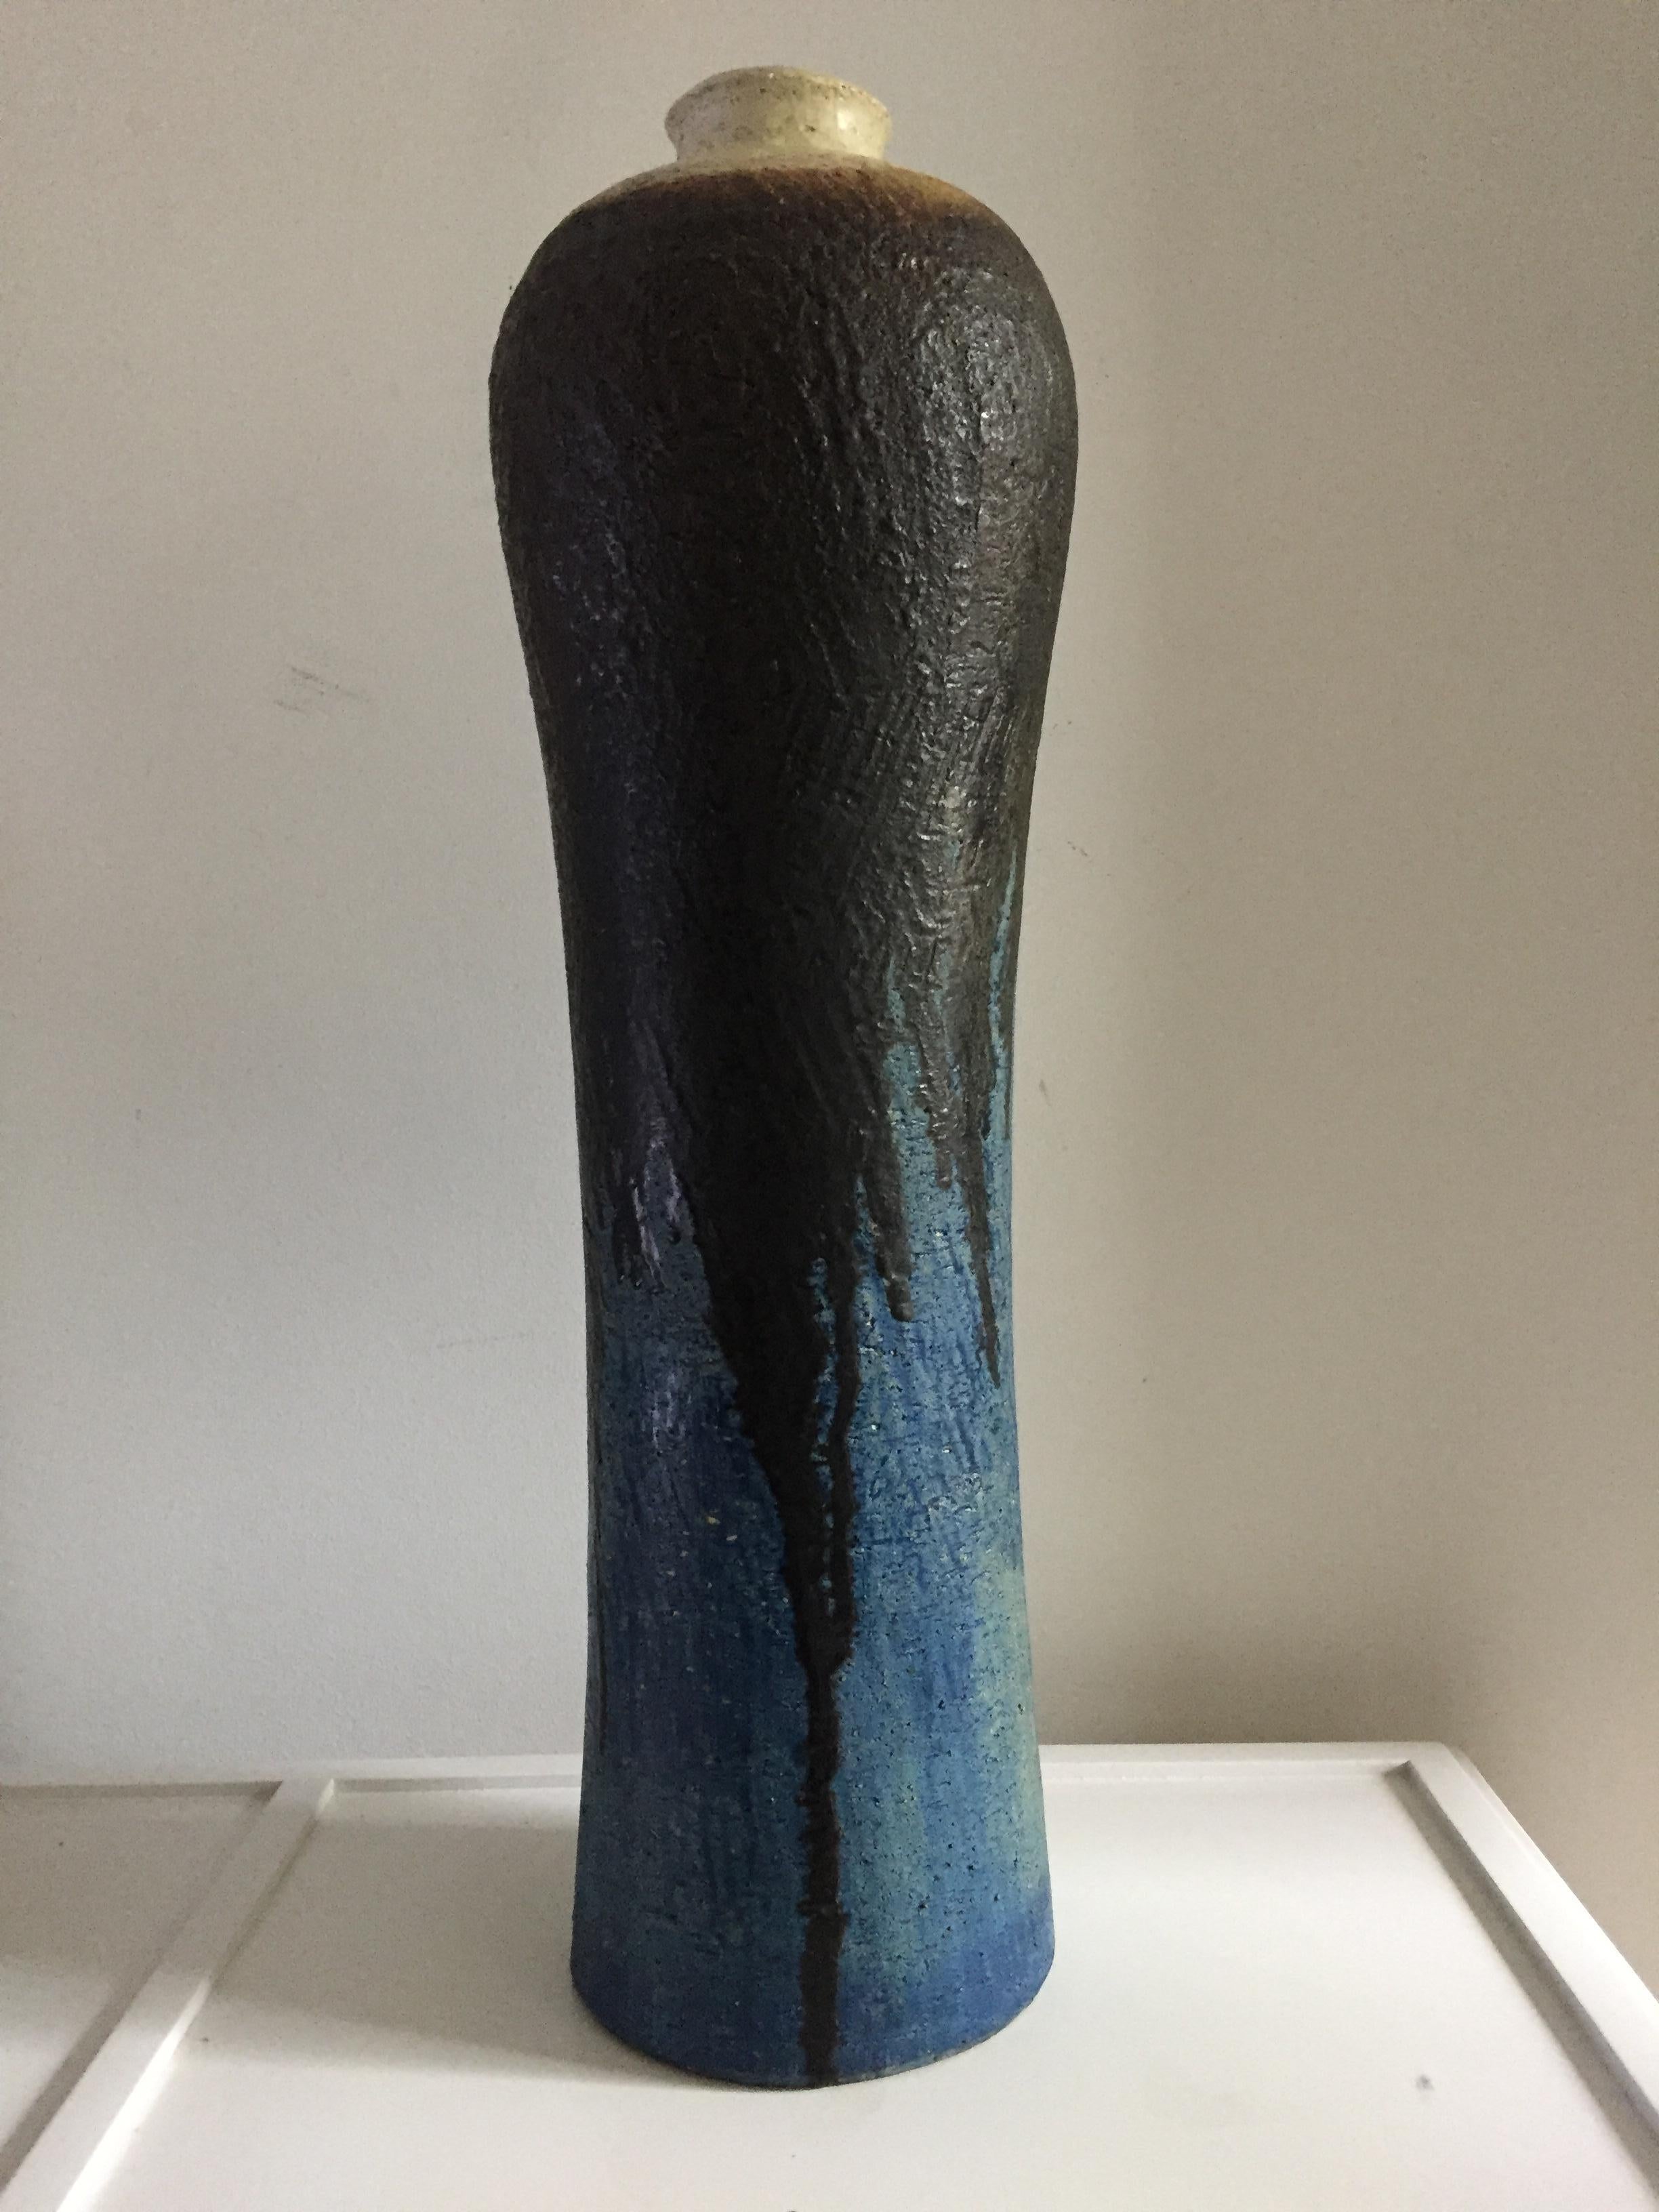 Monumental ceramic vase by Marcello Fantoni signed and numbered for Raymor ,tall and fluted at crème top with black glaze dripping down over a blue and turquoise hue's and texture.